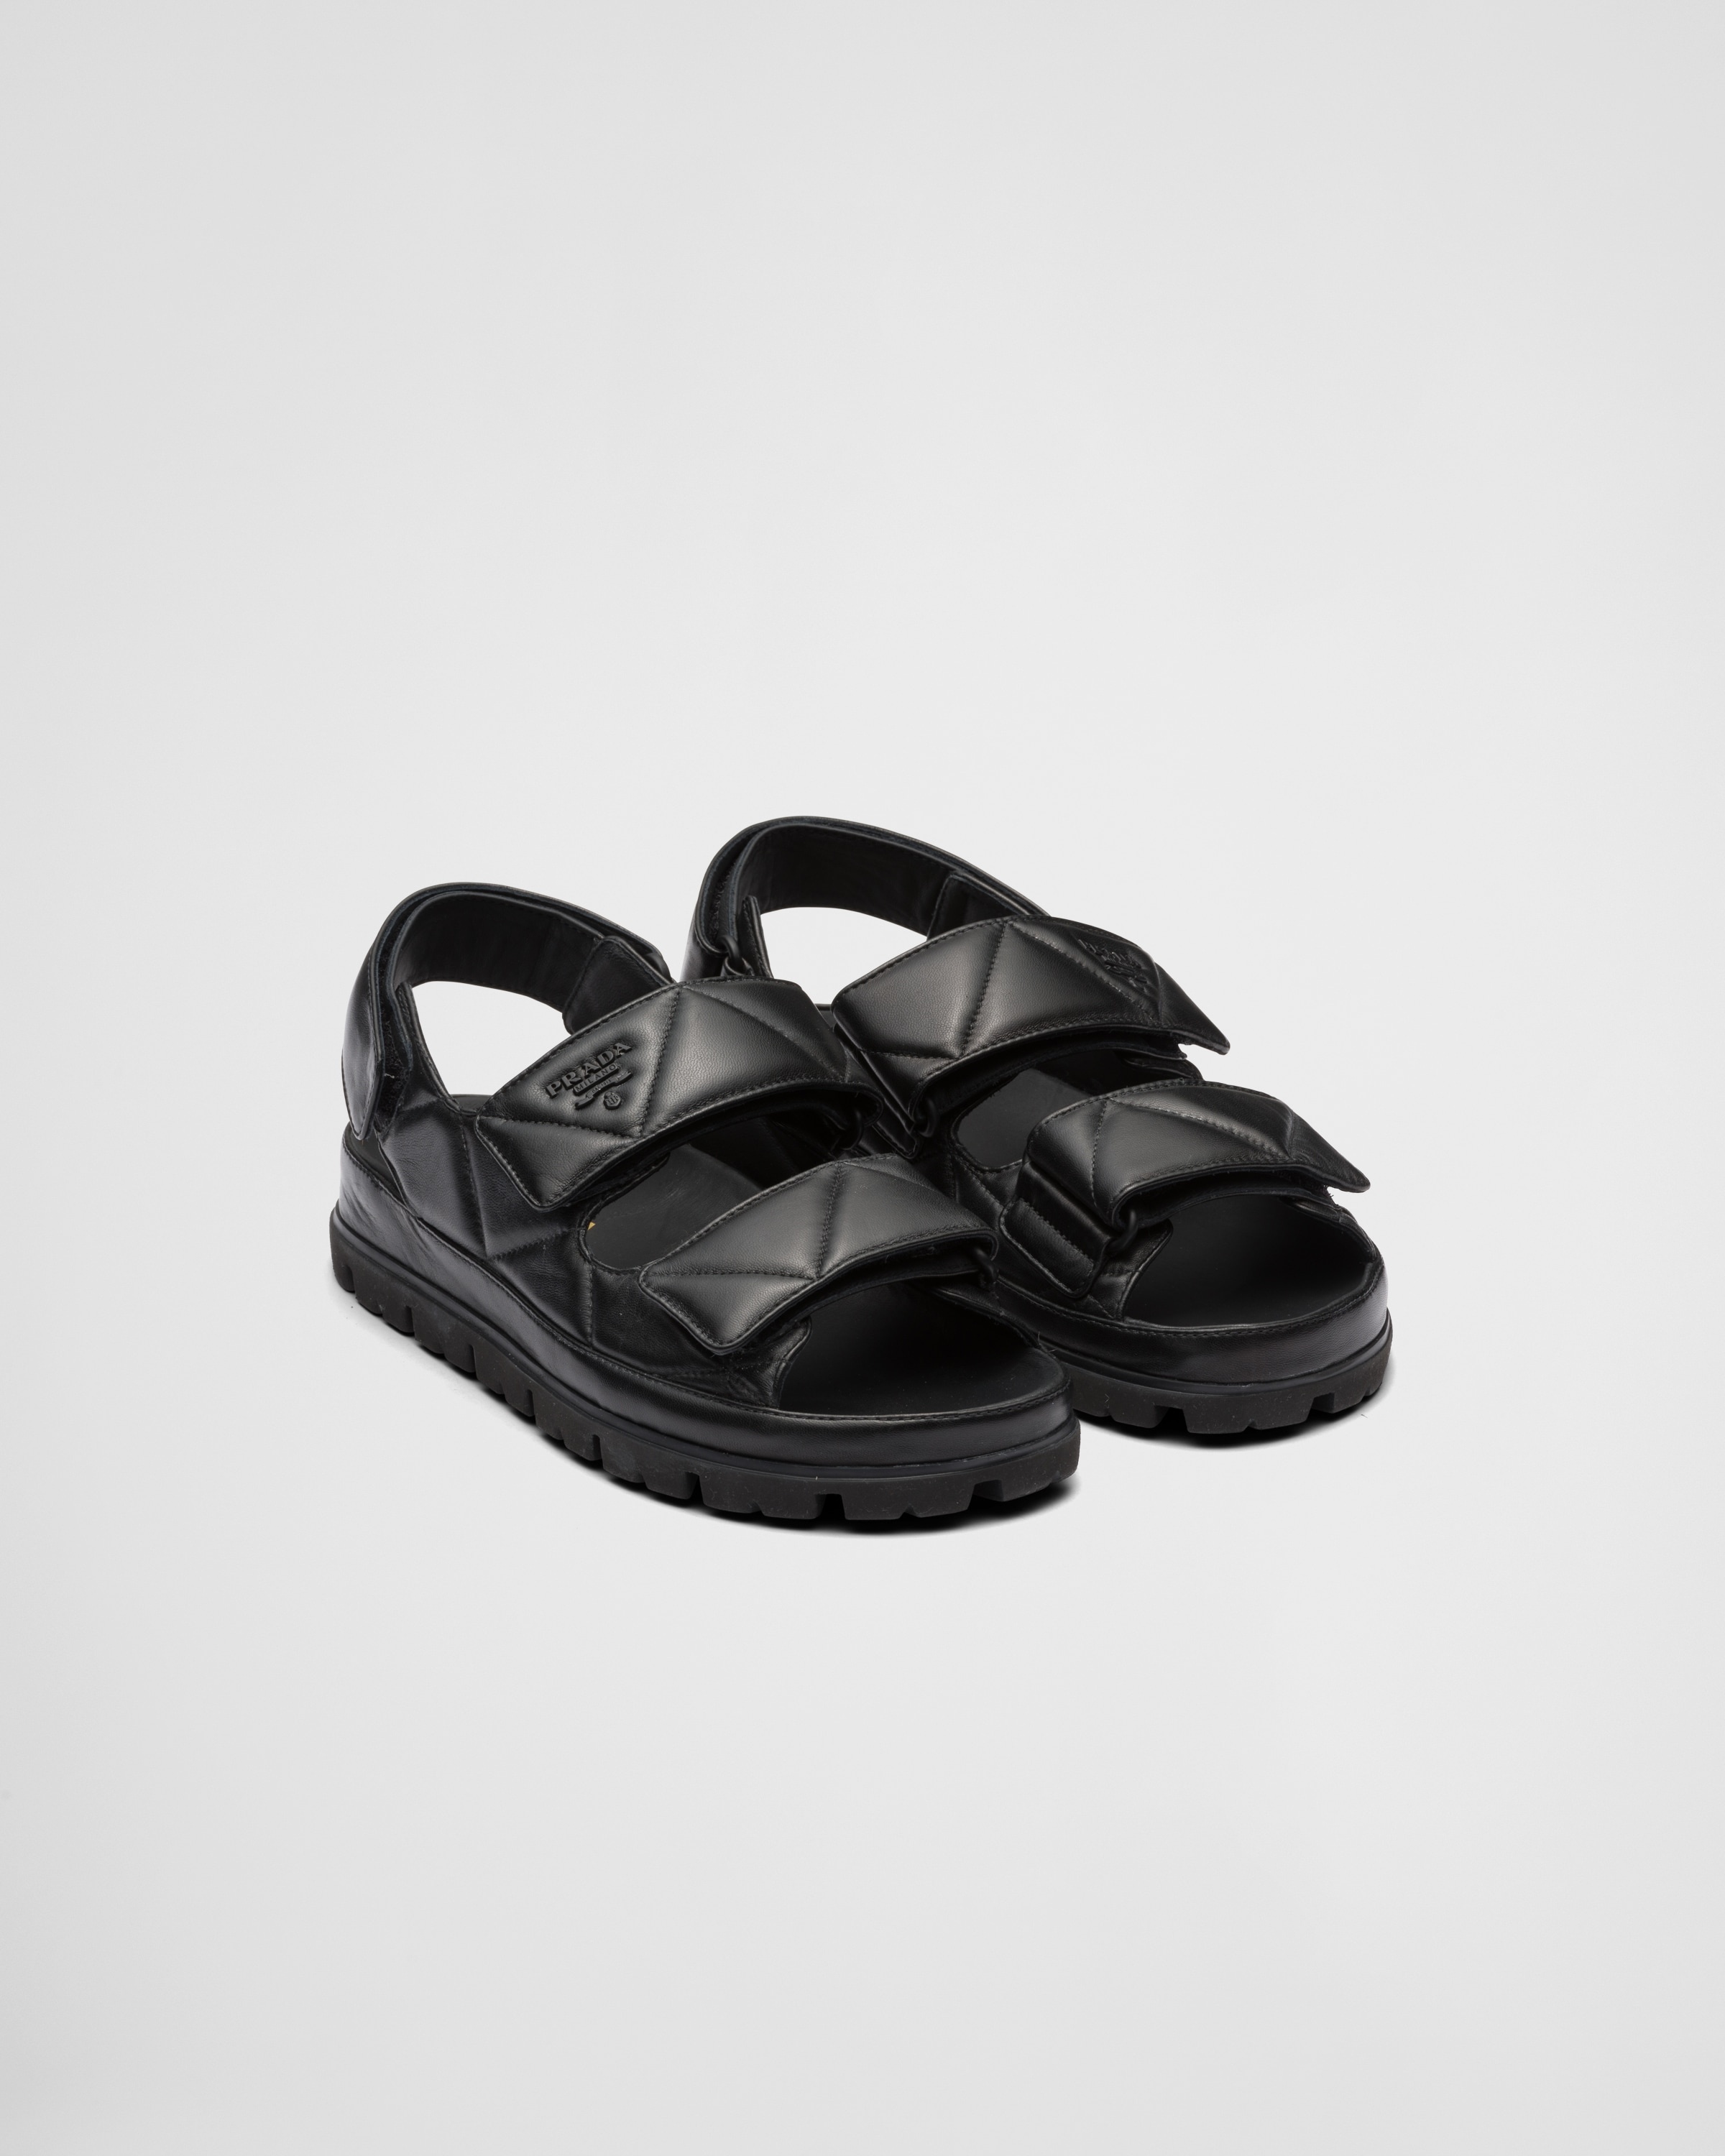 Padded nappa leather sandals - 1